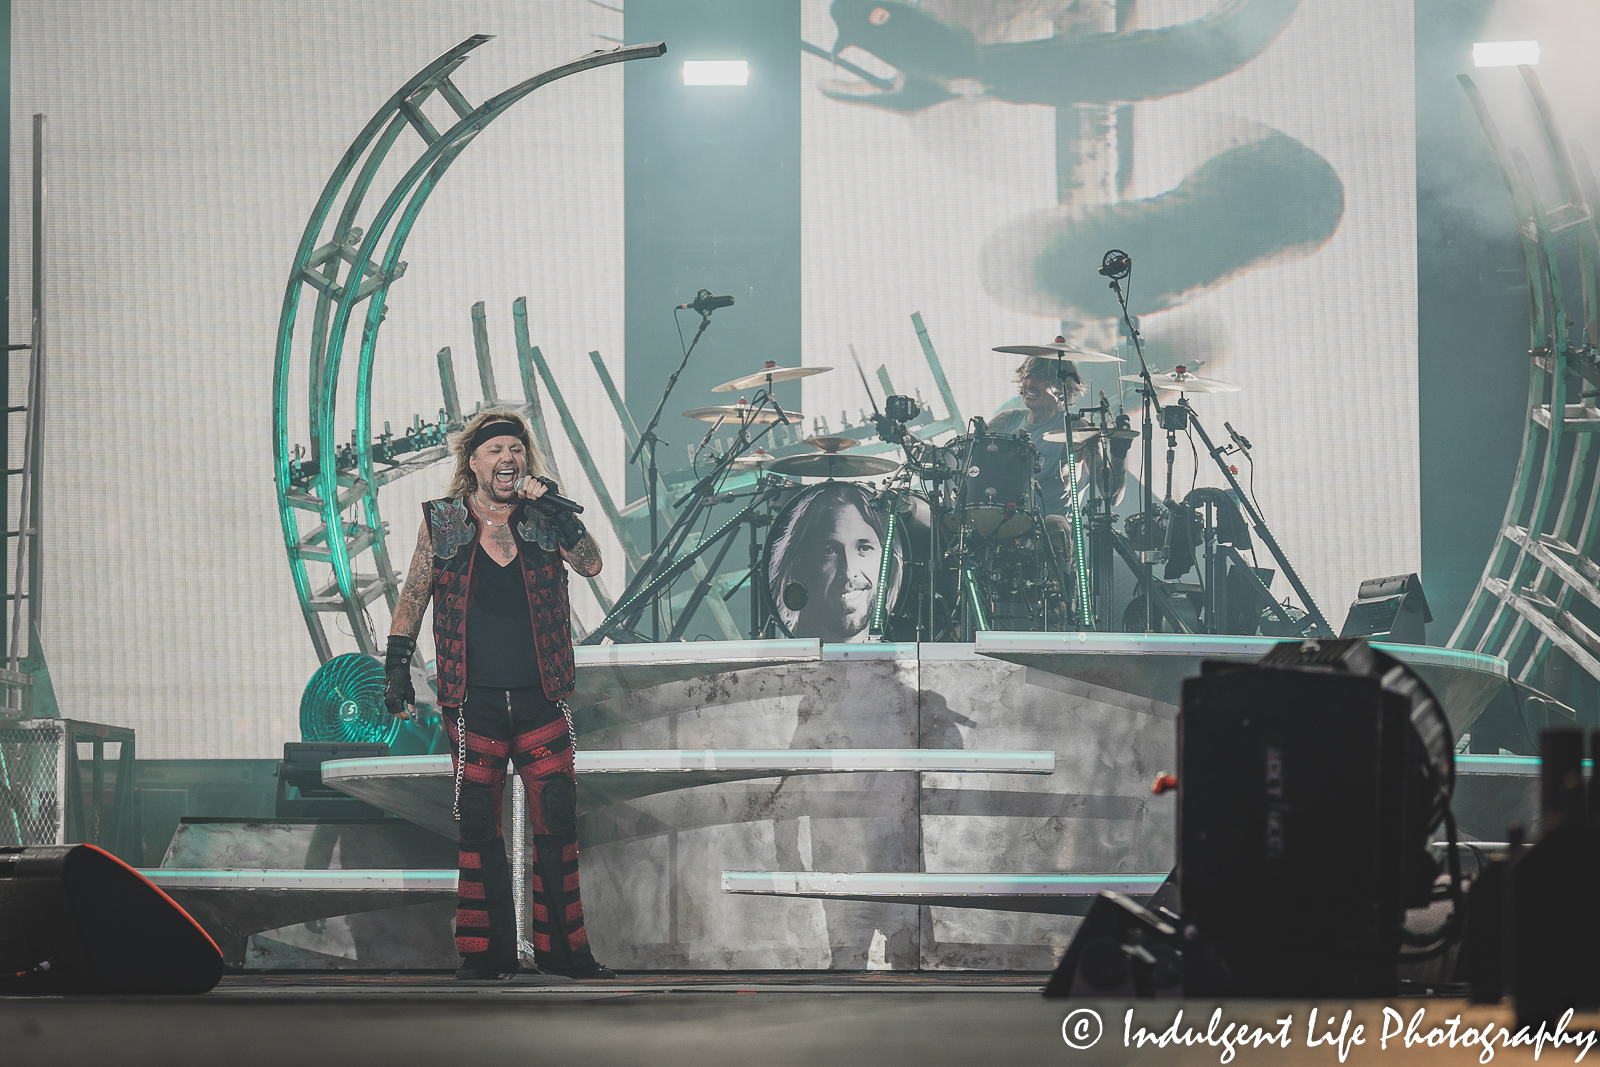 Lead singer Vince Neil and drummer Tommy Lee of Mötley Crüe performing live in concert at Kauffman Stadium in Kansas City, MO on July 19, 2022.